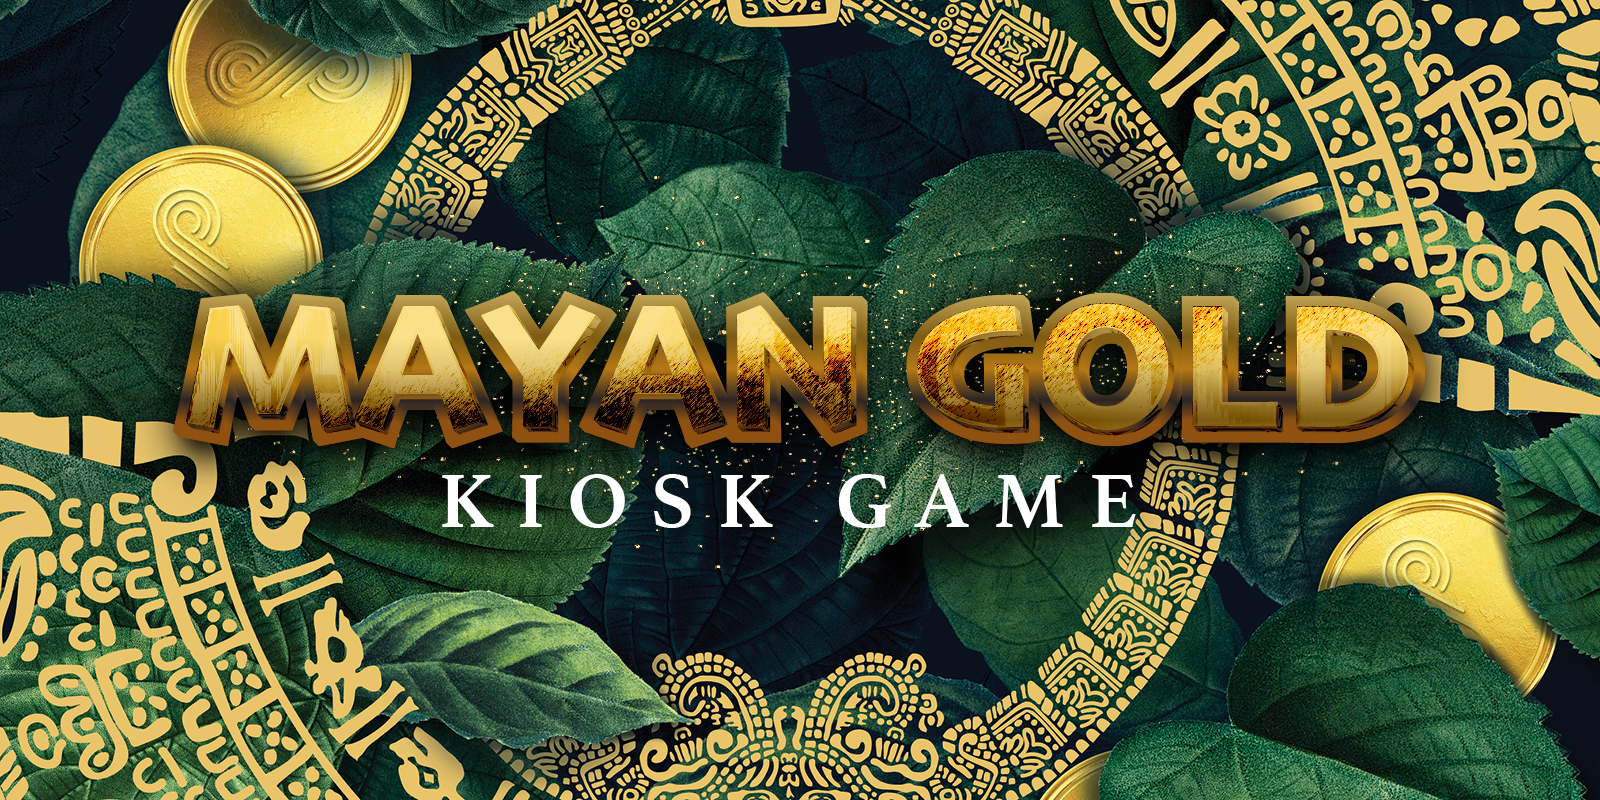 Mayan Gold Kiosk Game creative that shows greenery and gold accents with a Mayan theme